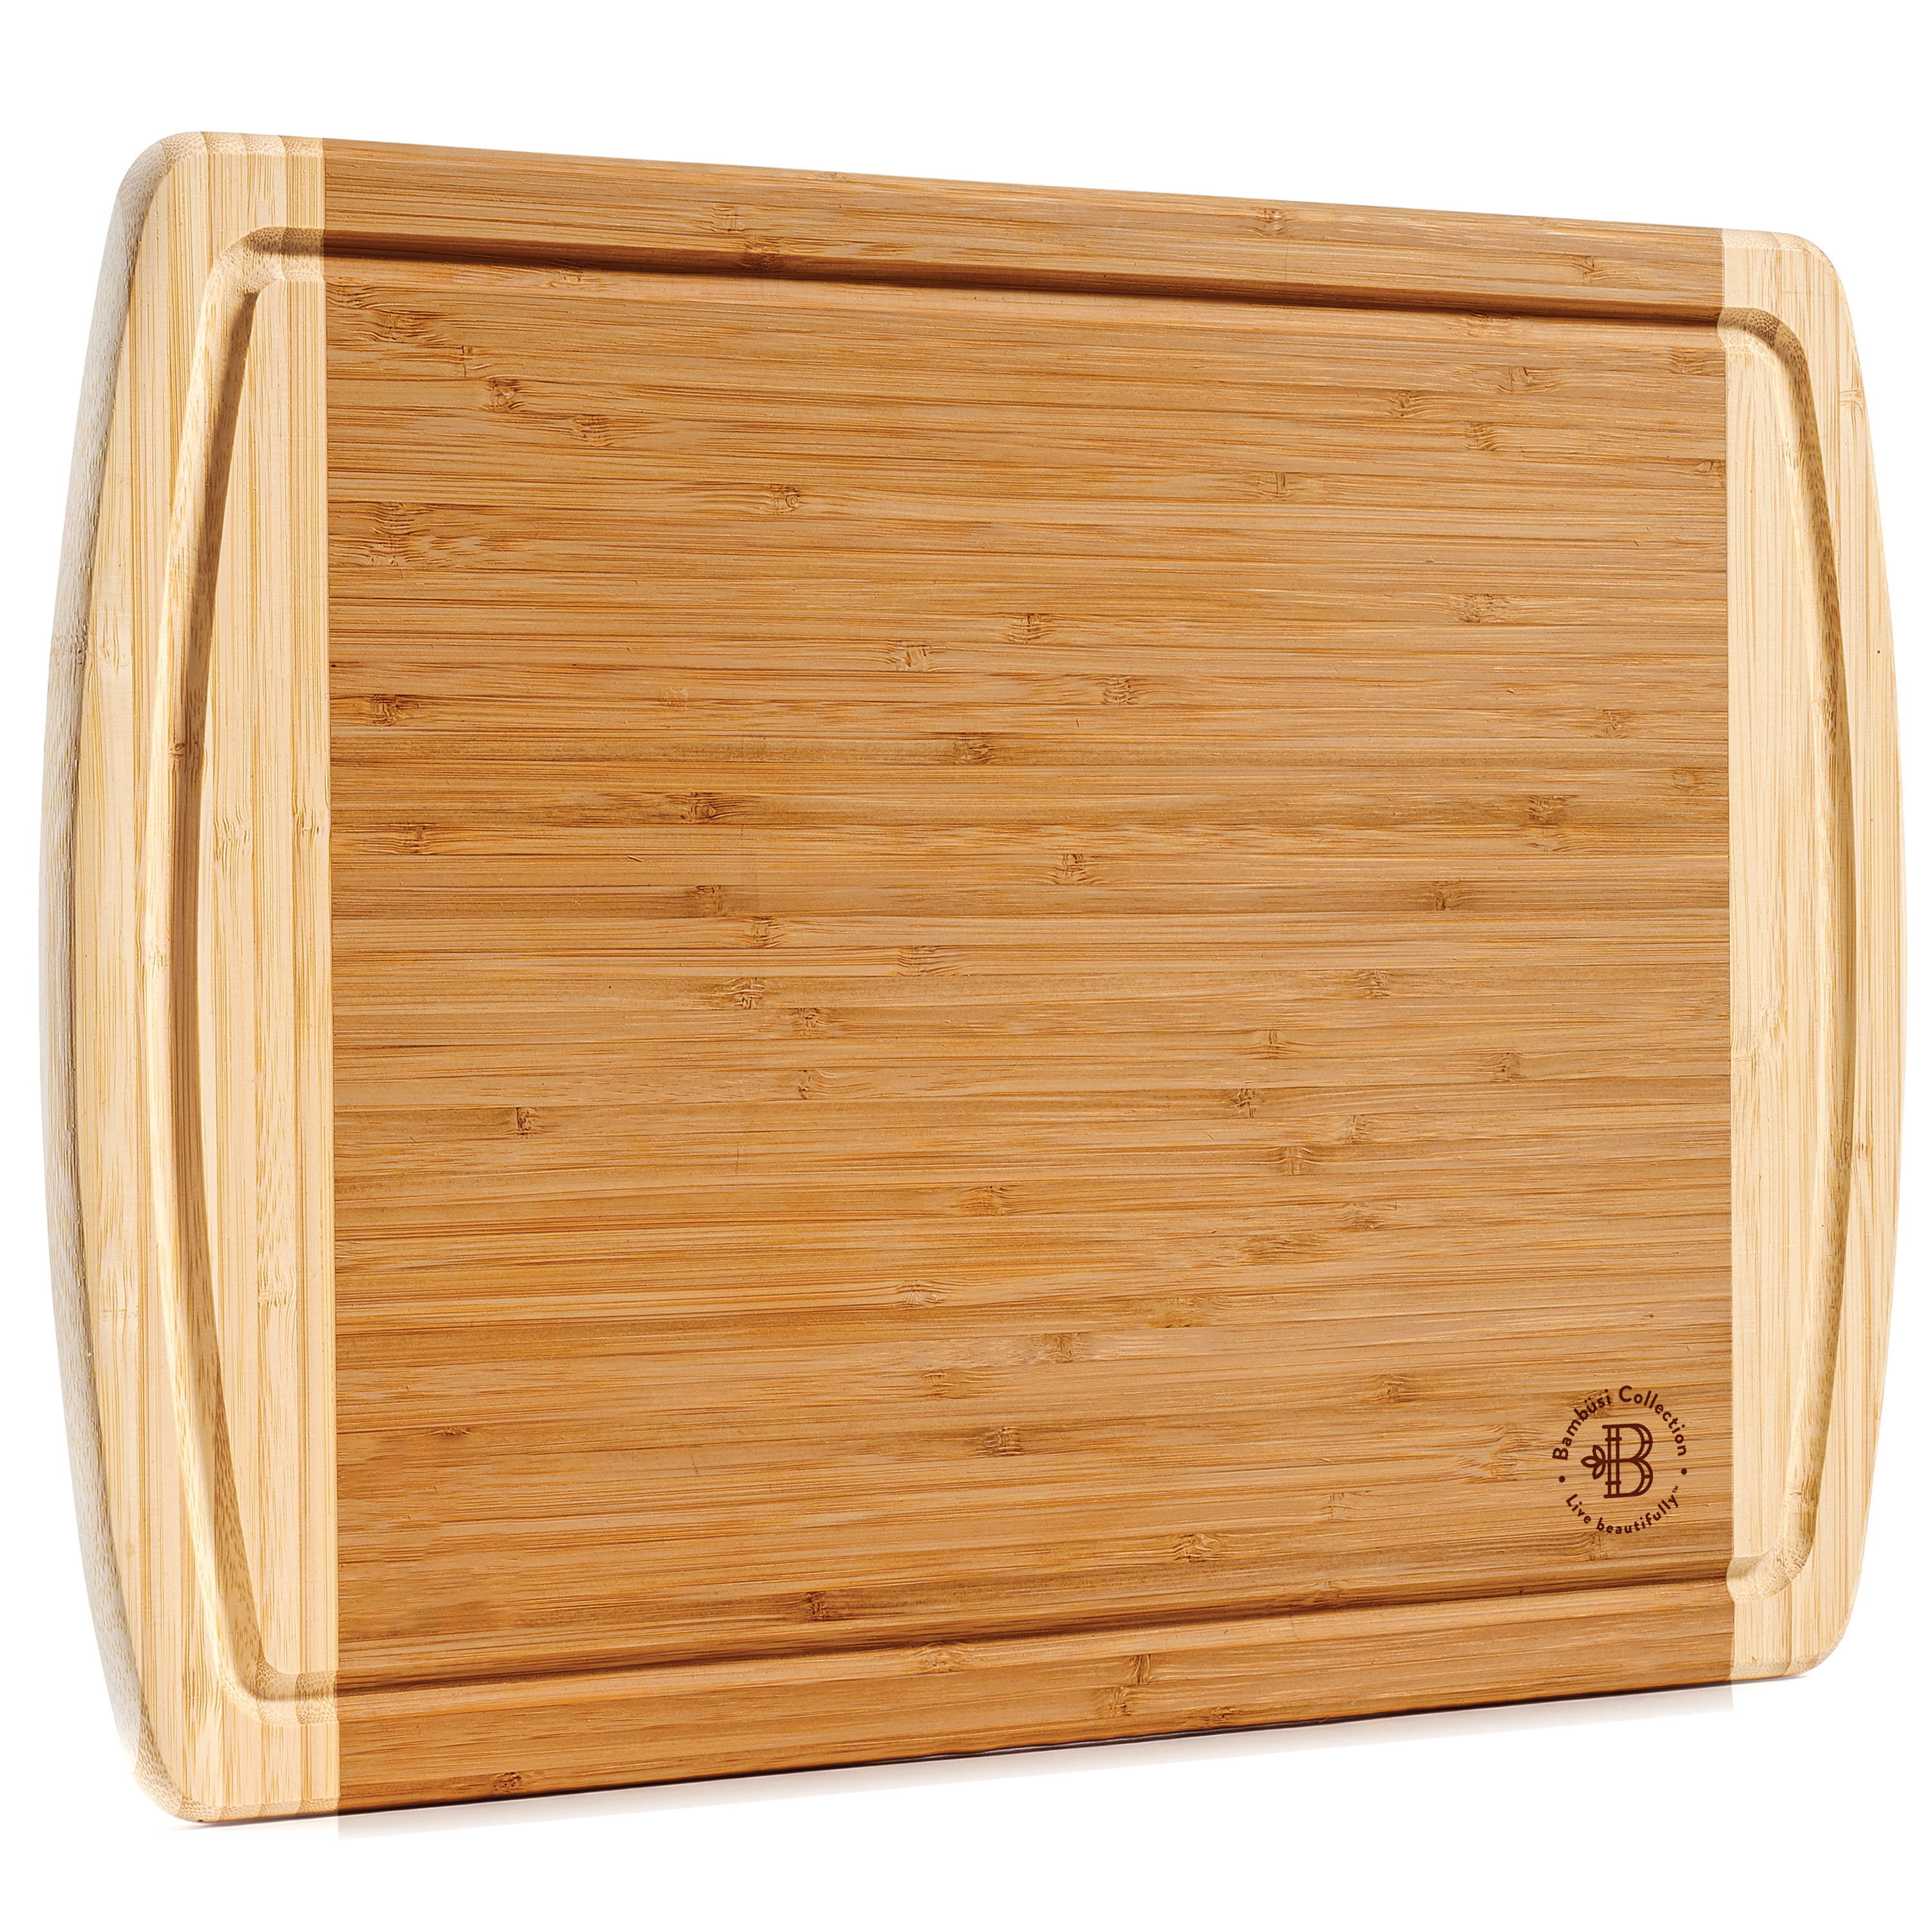 Bambüsi Extra Large Bamboo Cutting Board, Kitchen Chopping Board, Wooden Cutting Board With Juice Grooves. By: Bambusi - image 1 of 7